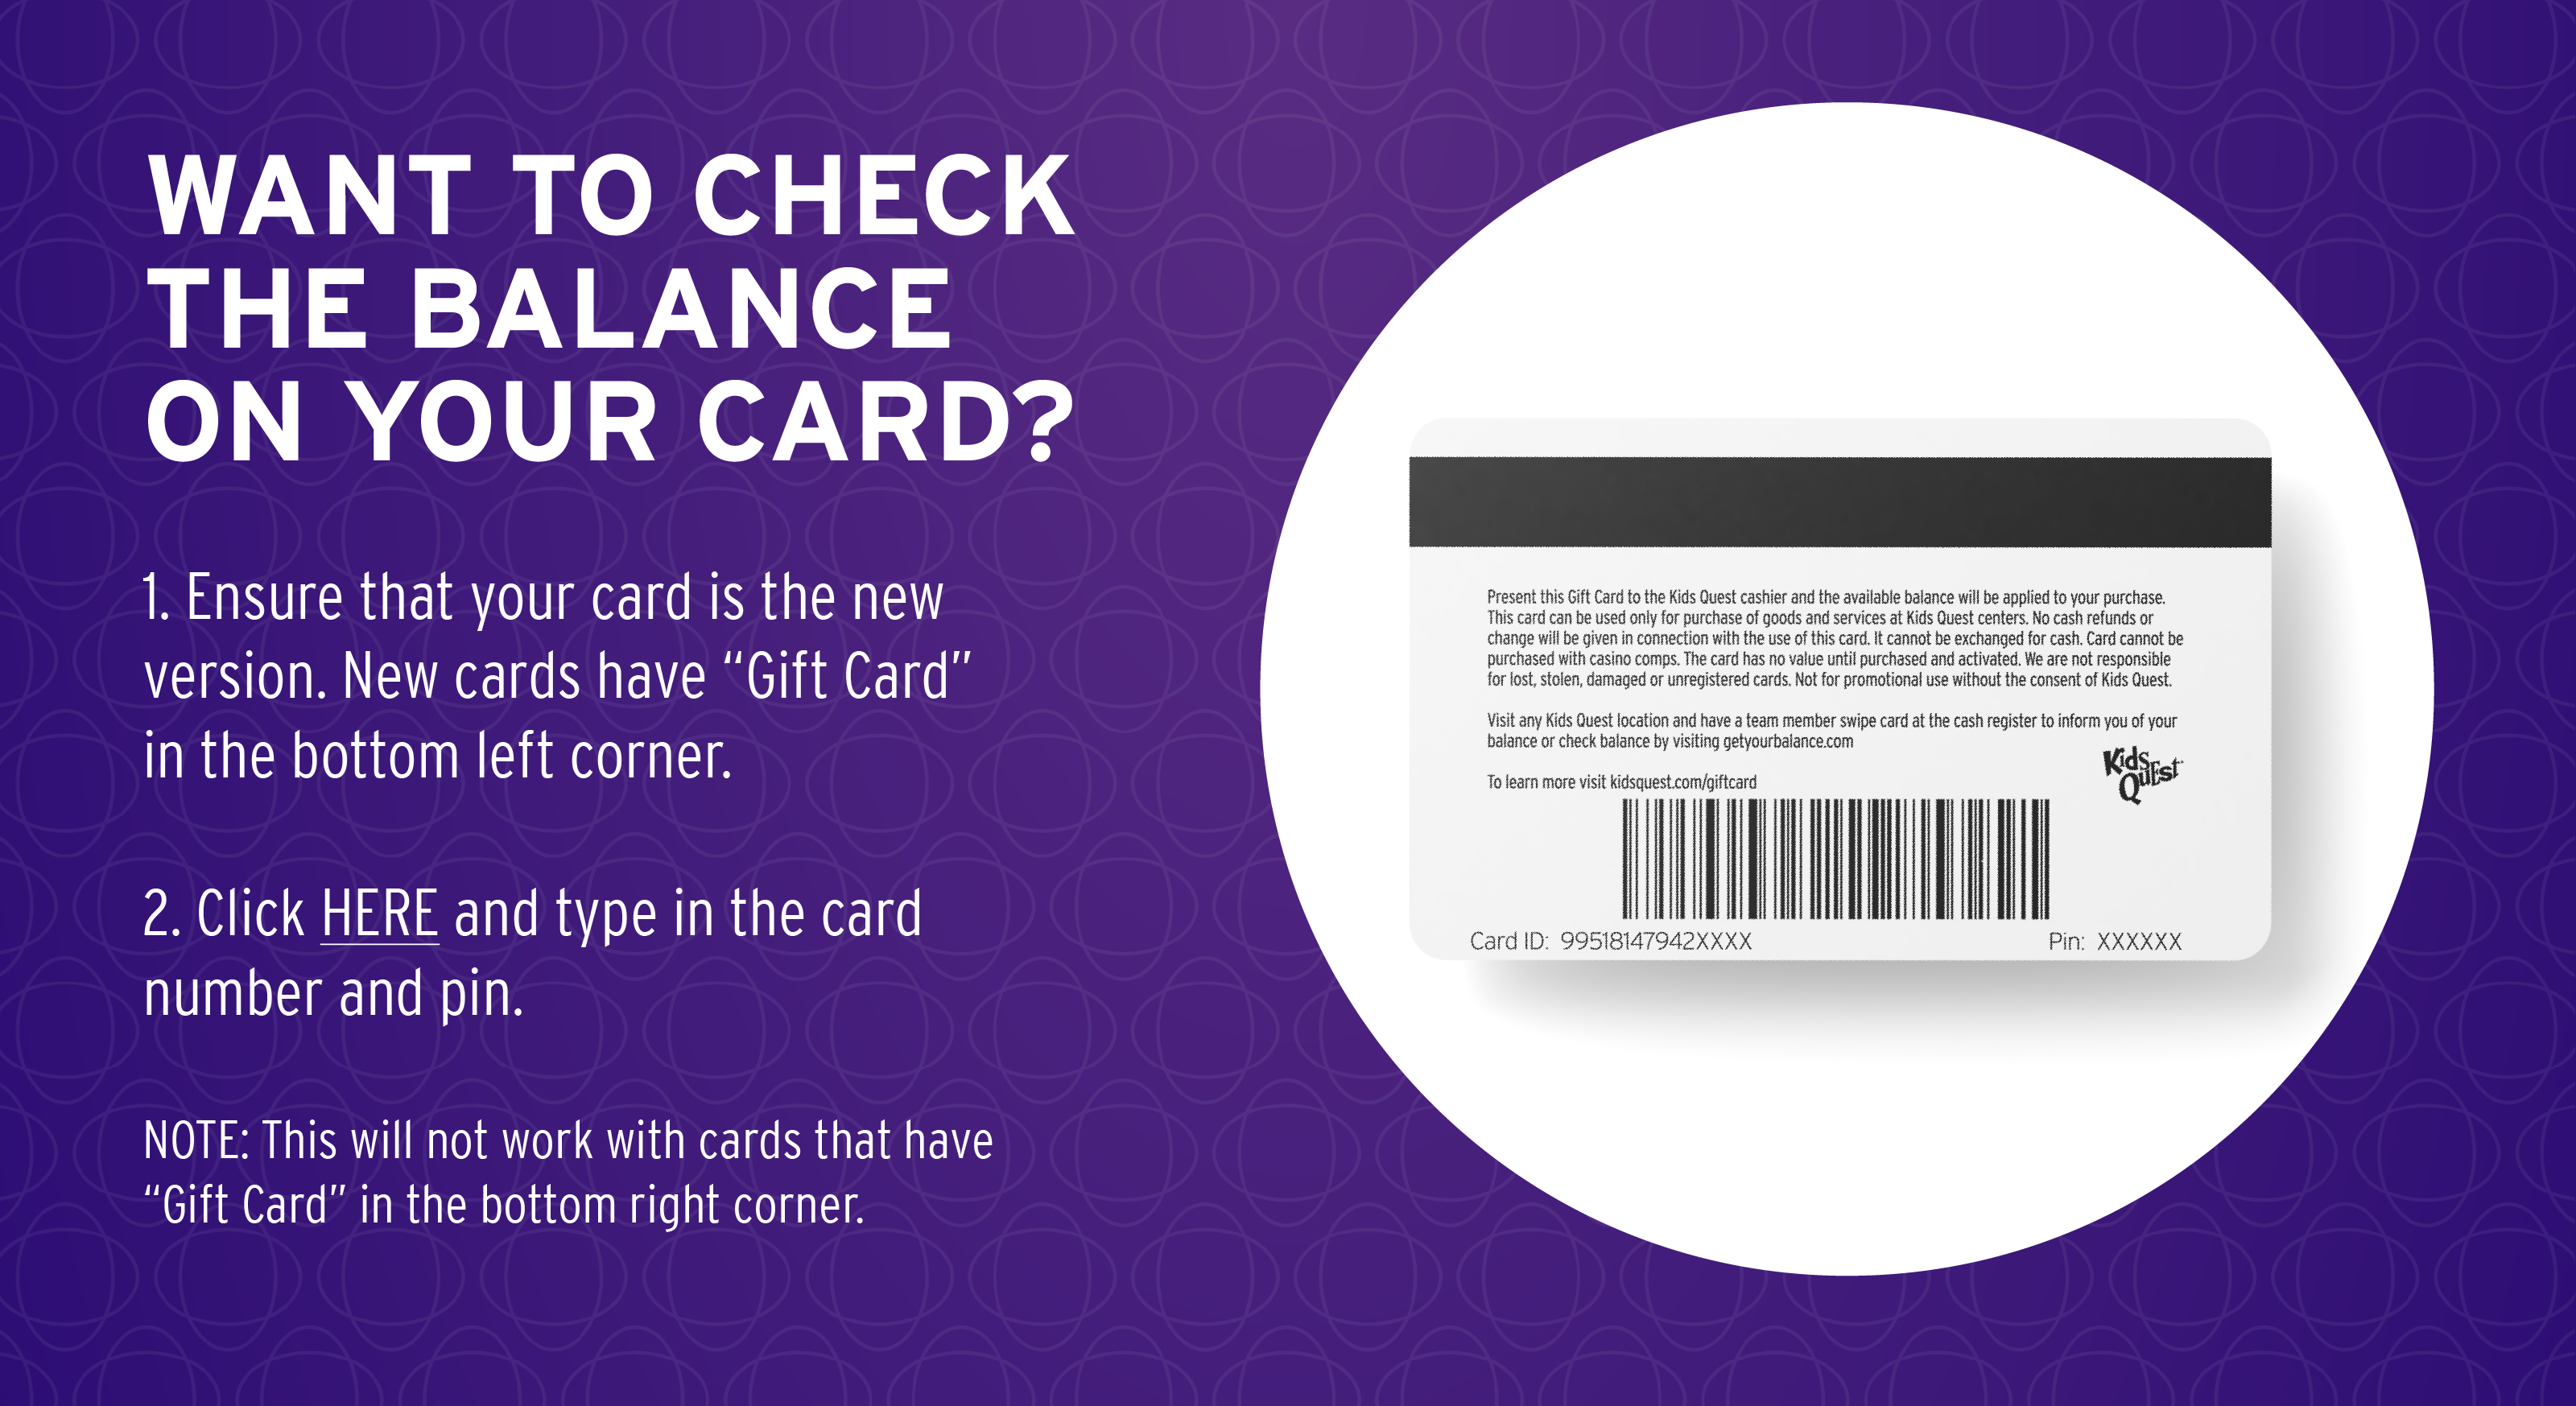 Want to Check the Balance on Your Card?